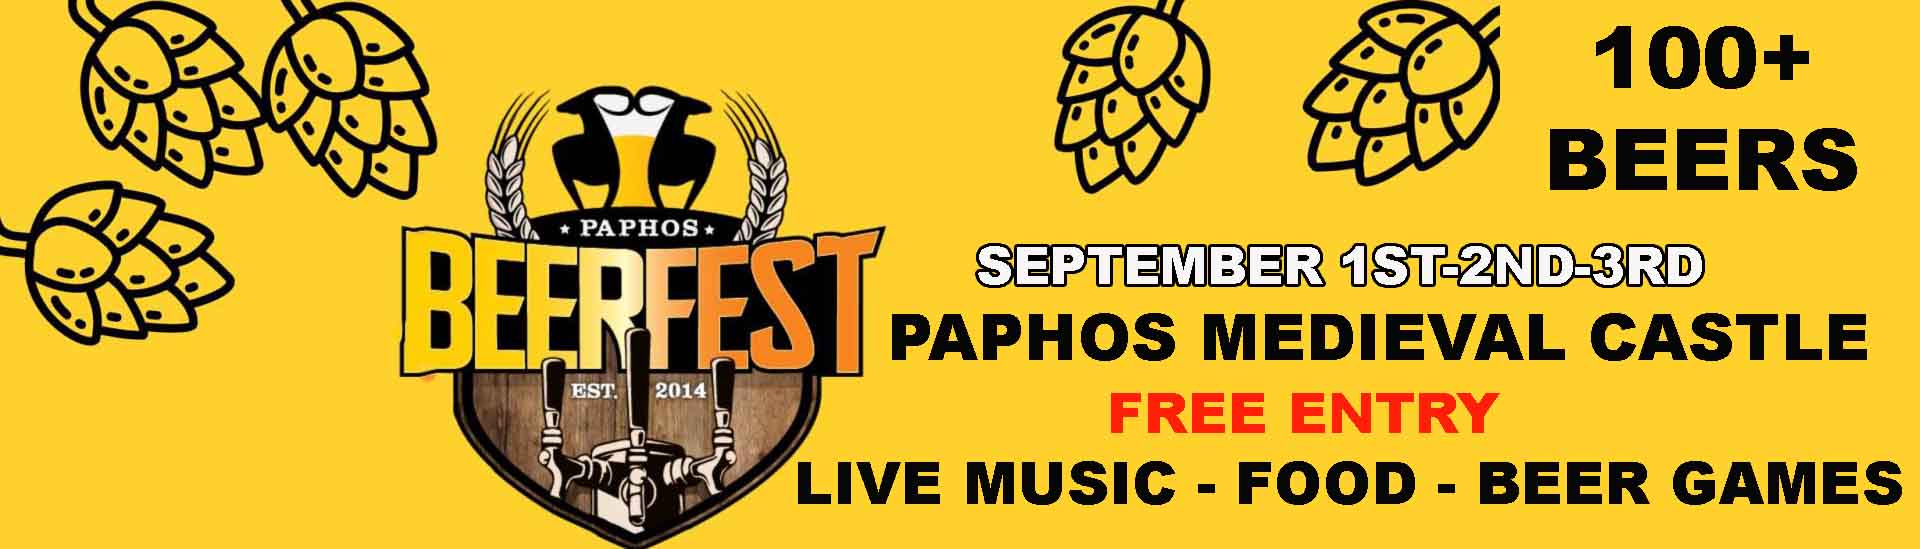 The Paphos Beer Festival